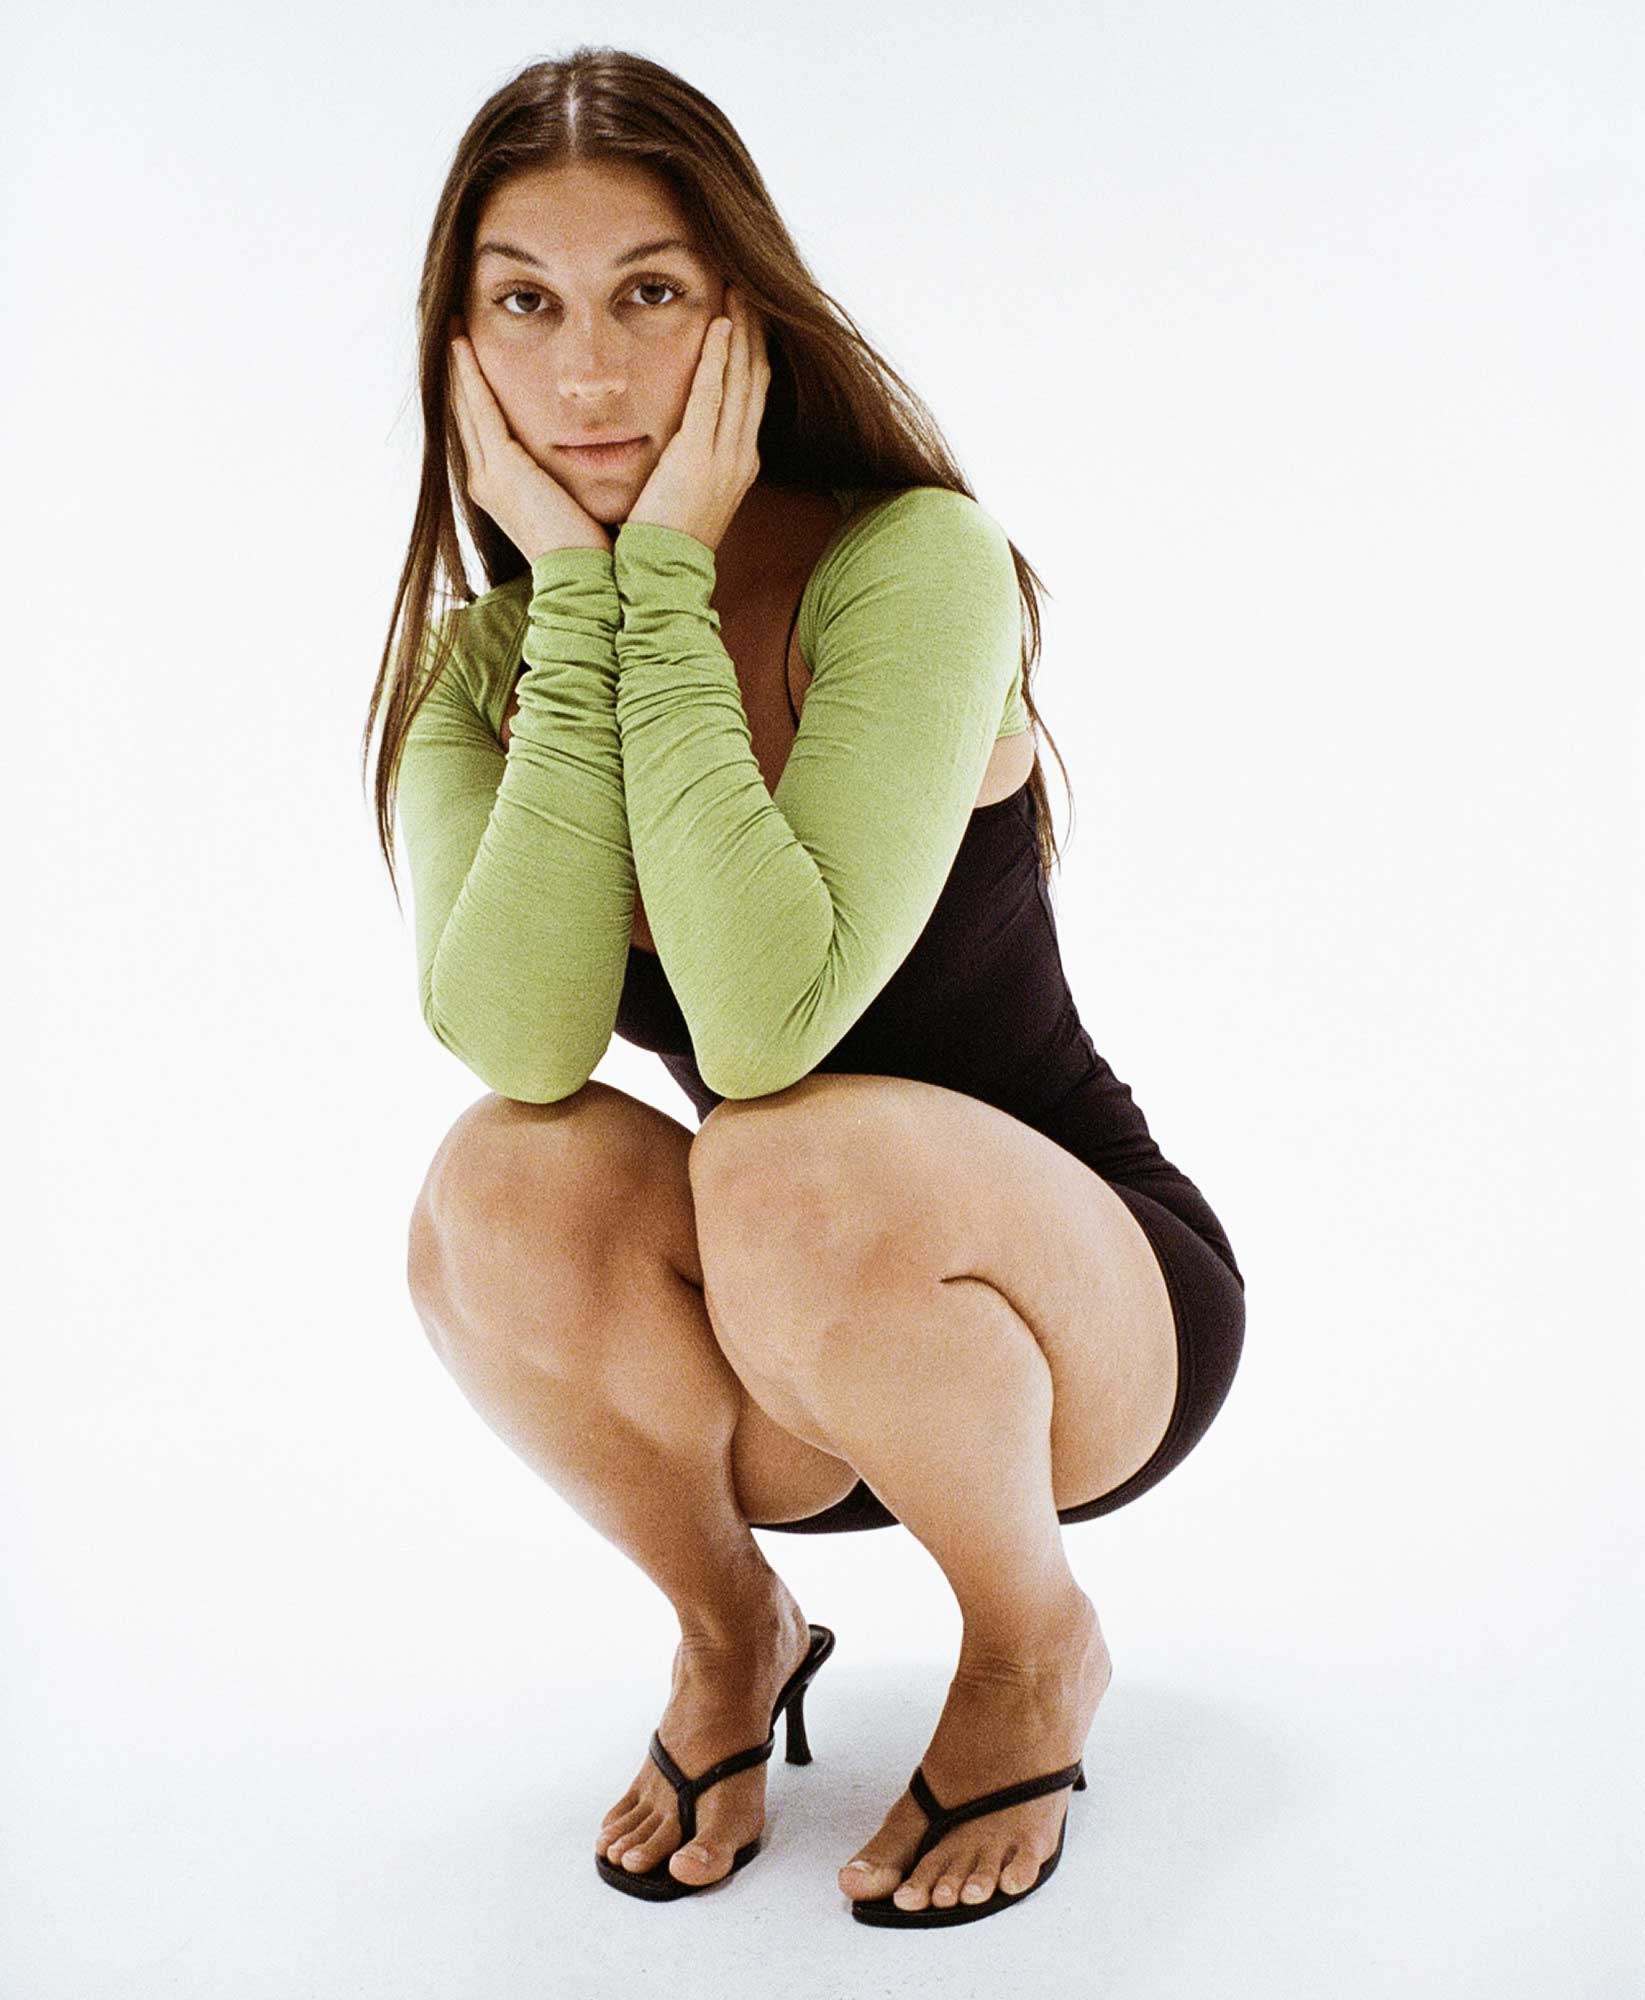 Wear One's At The Scrunch Shrug in Kiwi Green on model bending at knees front view